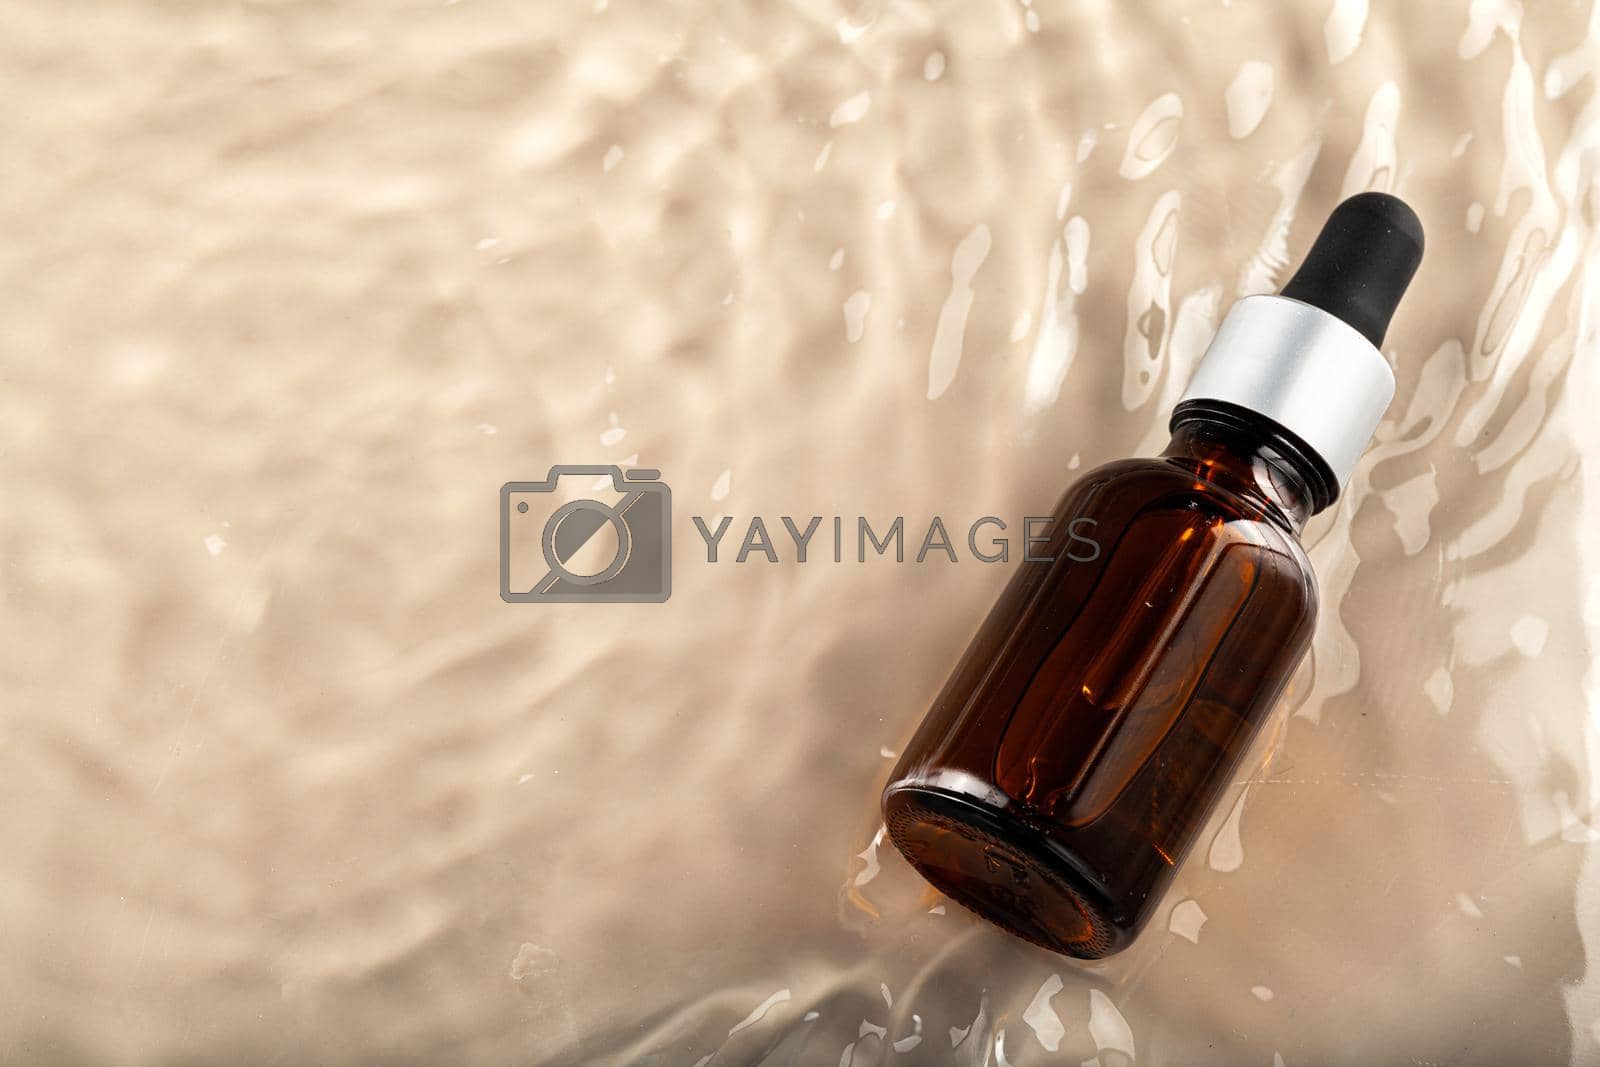 Royalty free image of Cosmetic bottle with pipette in wavy water by Fabrikasimf